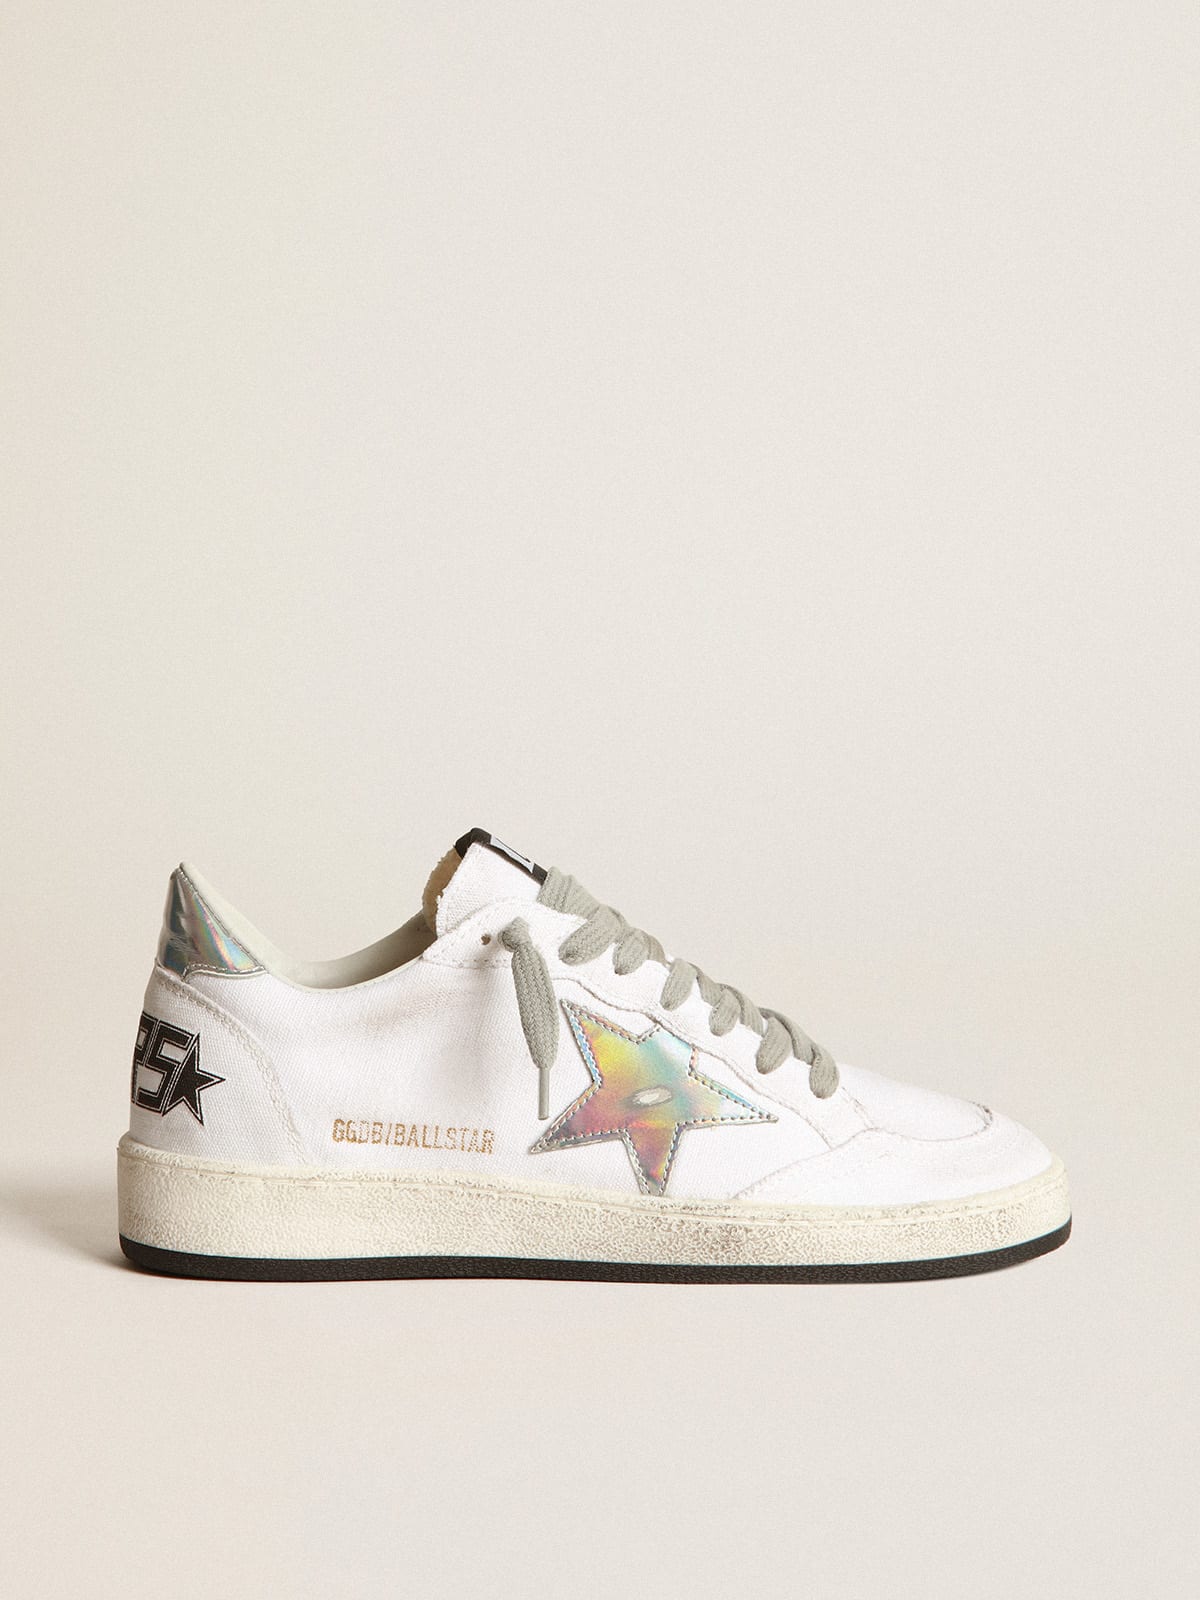 Golden Goose - Ball Star sneakers in white canvas with iridescent leather star and heel tab in 